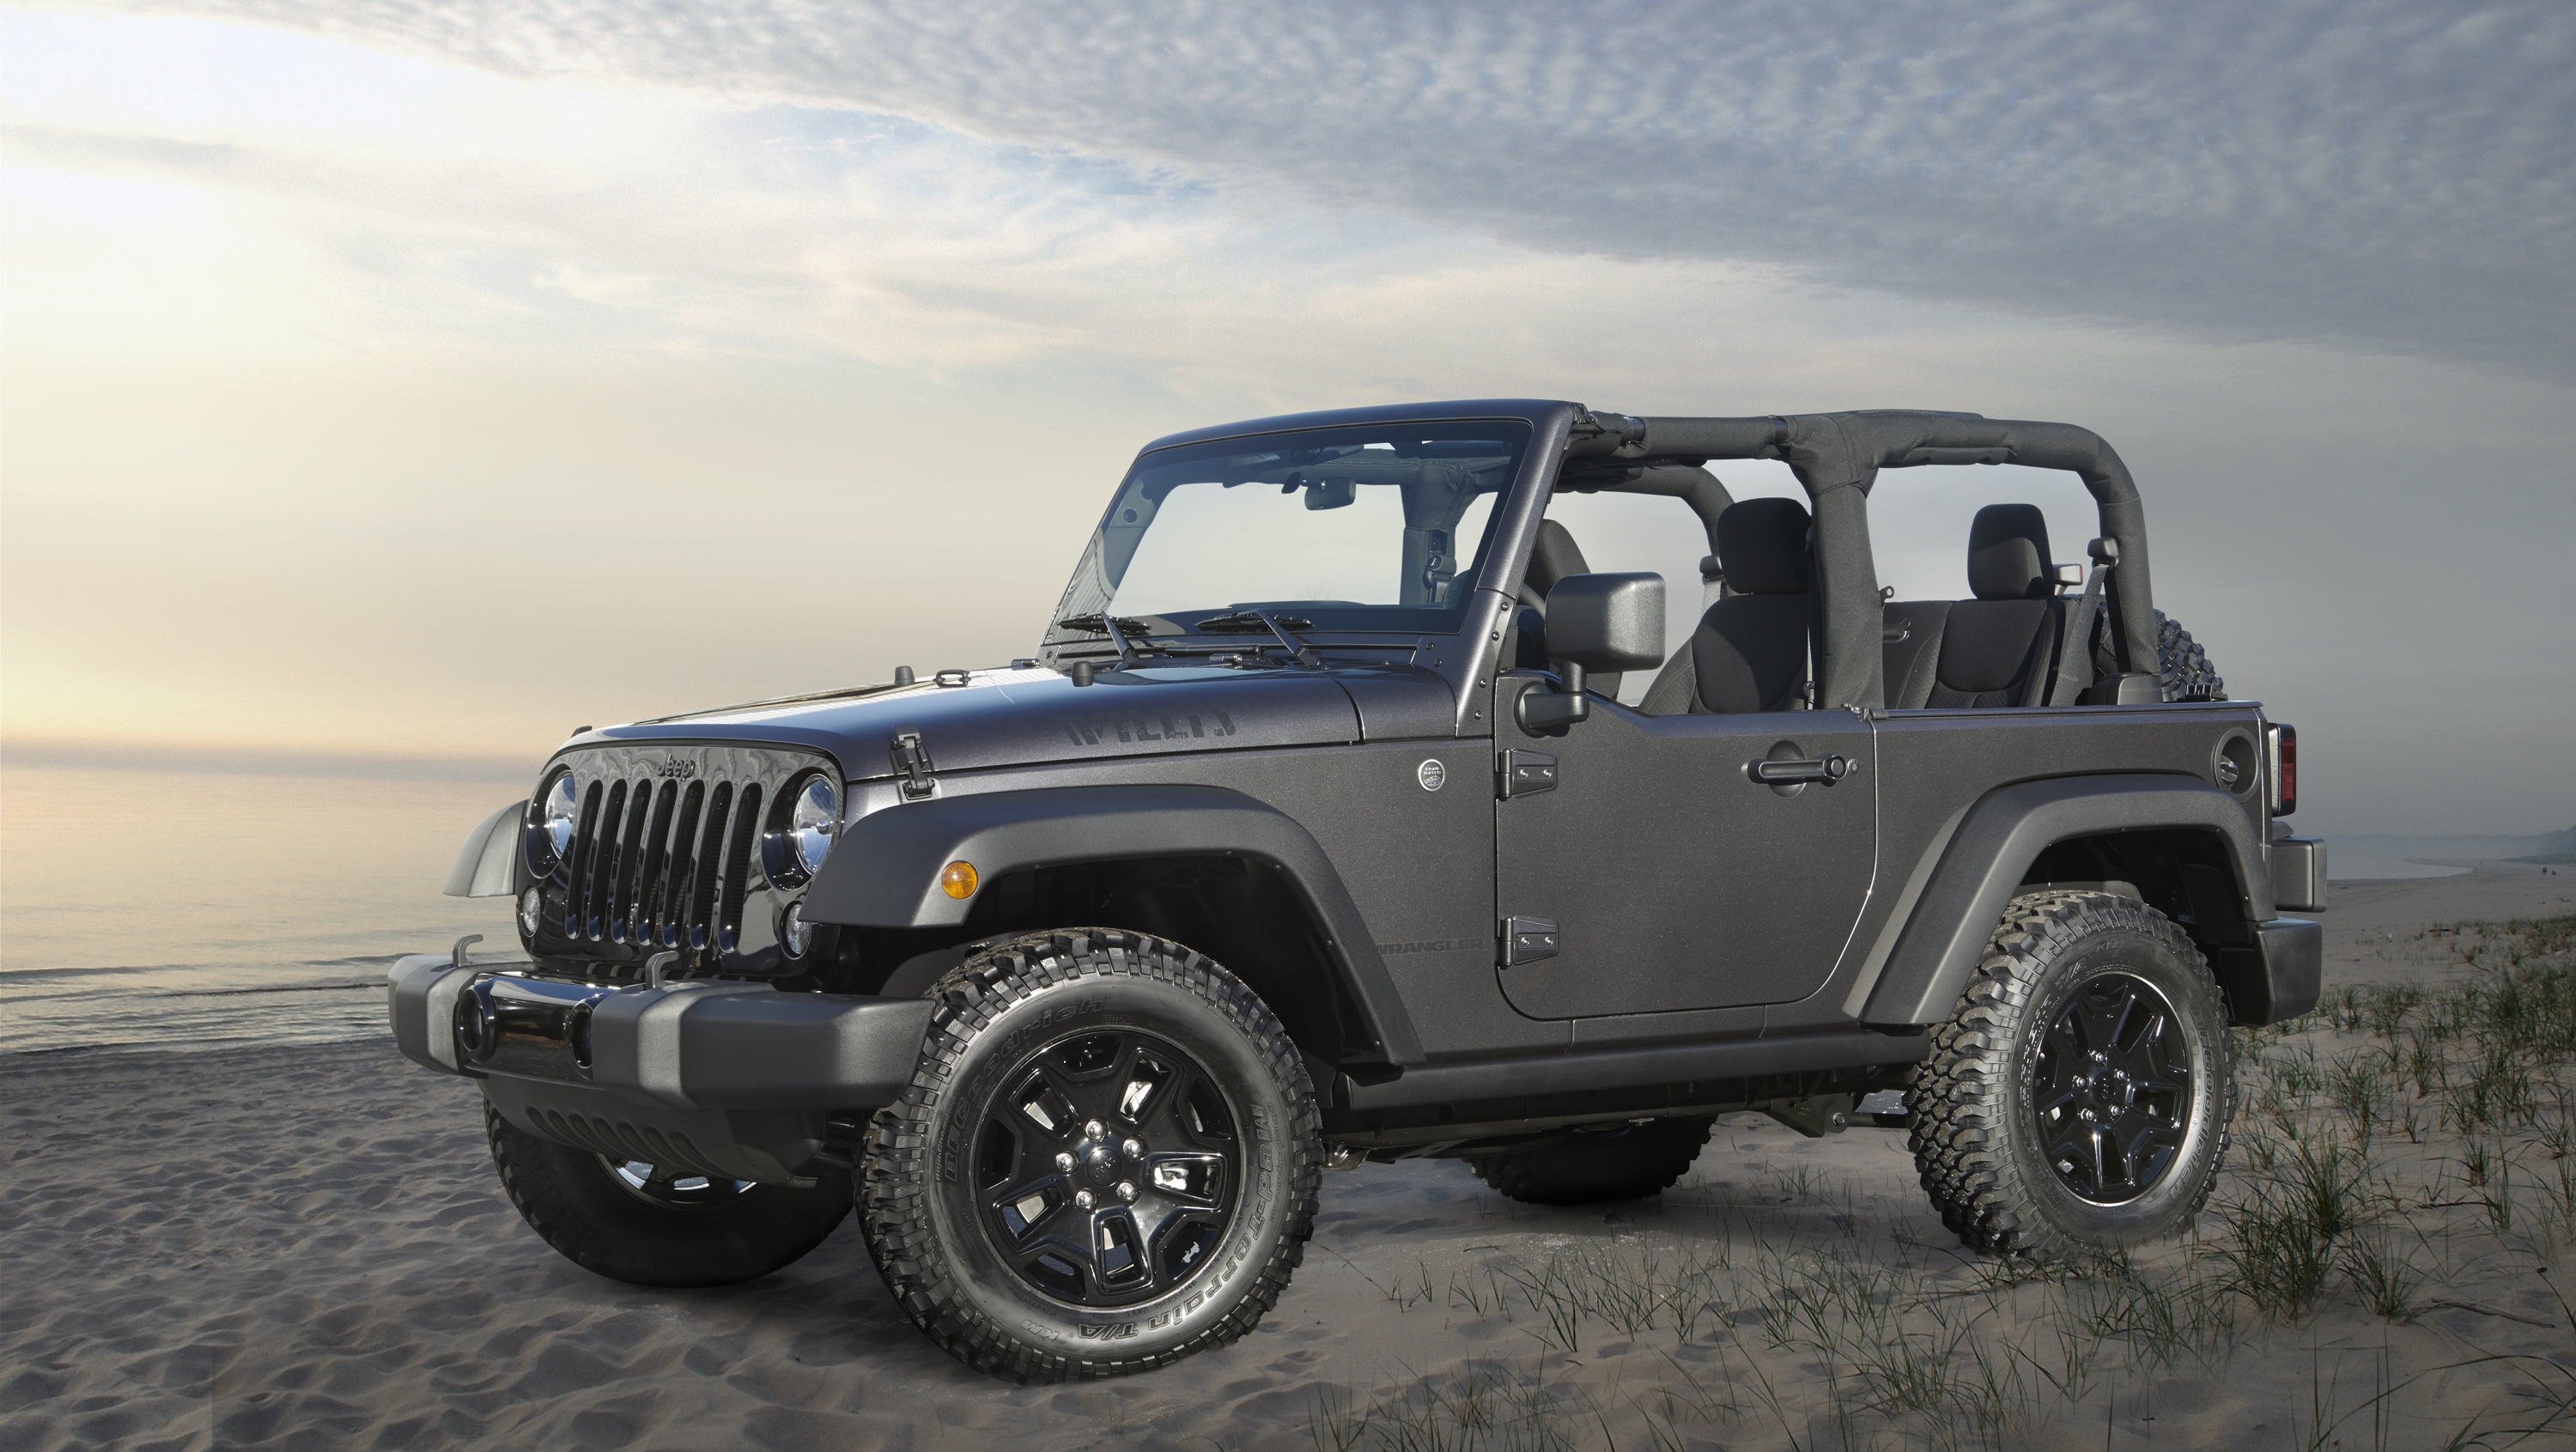 Jeep WRANGLER SHOWS LOWEST DEPRECIATION AMONG ALL VEHICLES,   STUDY SHOWS - Chrysler Capital